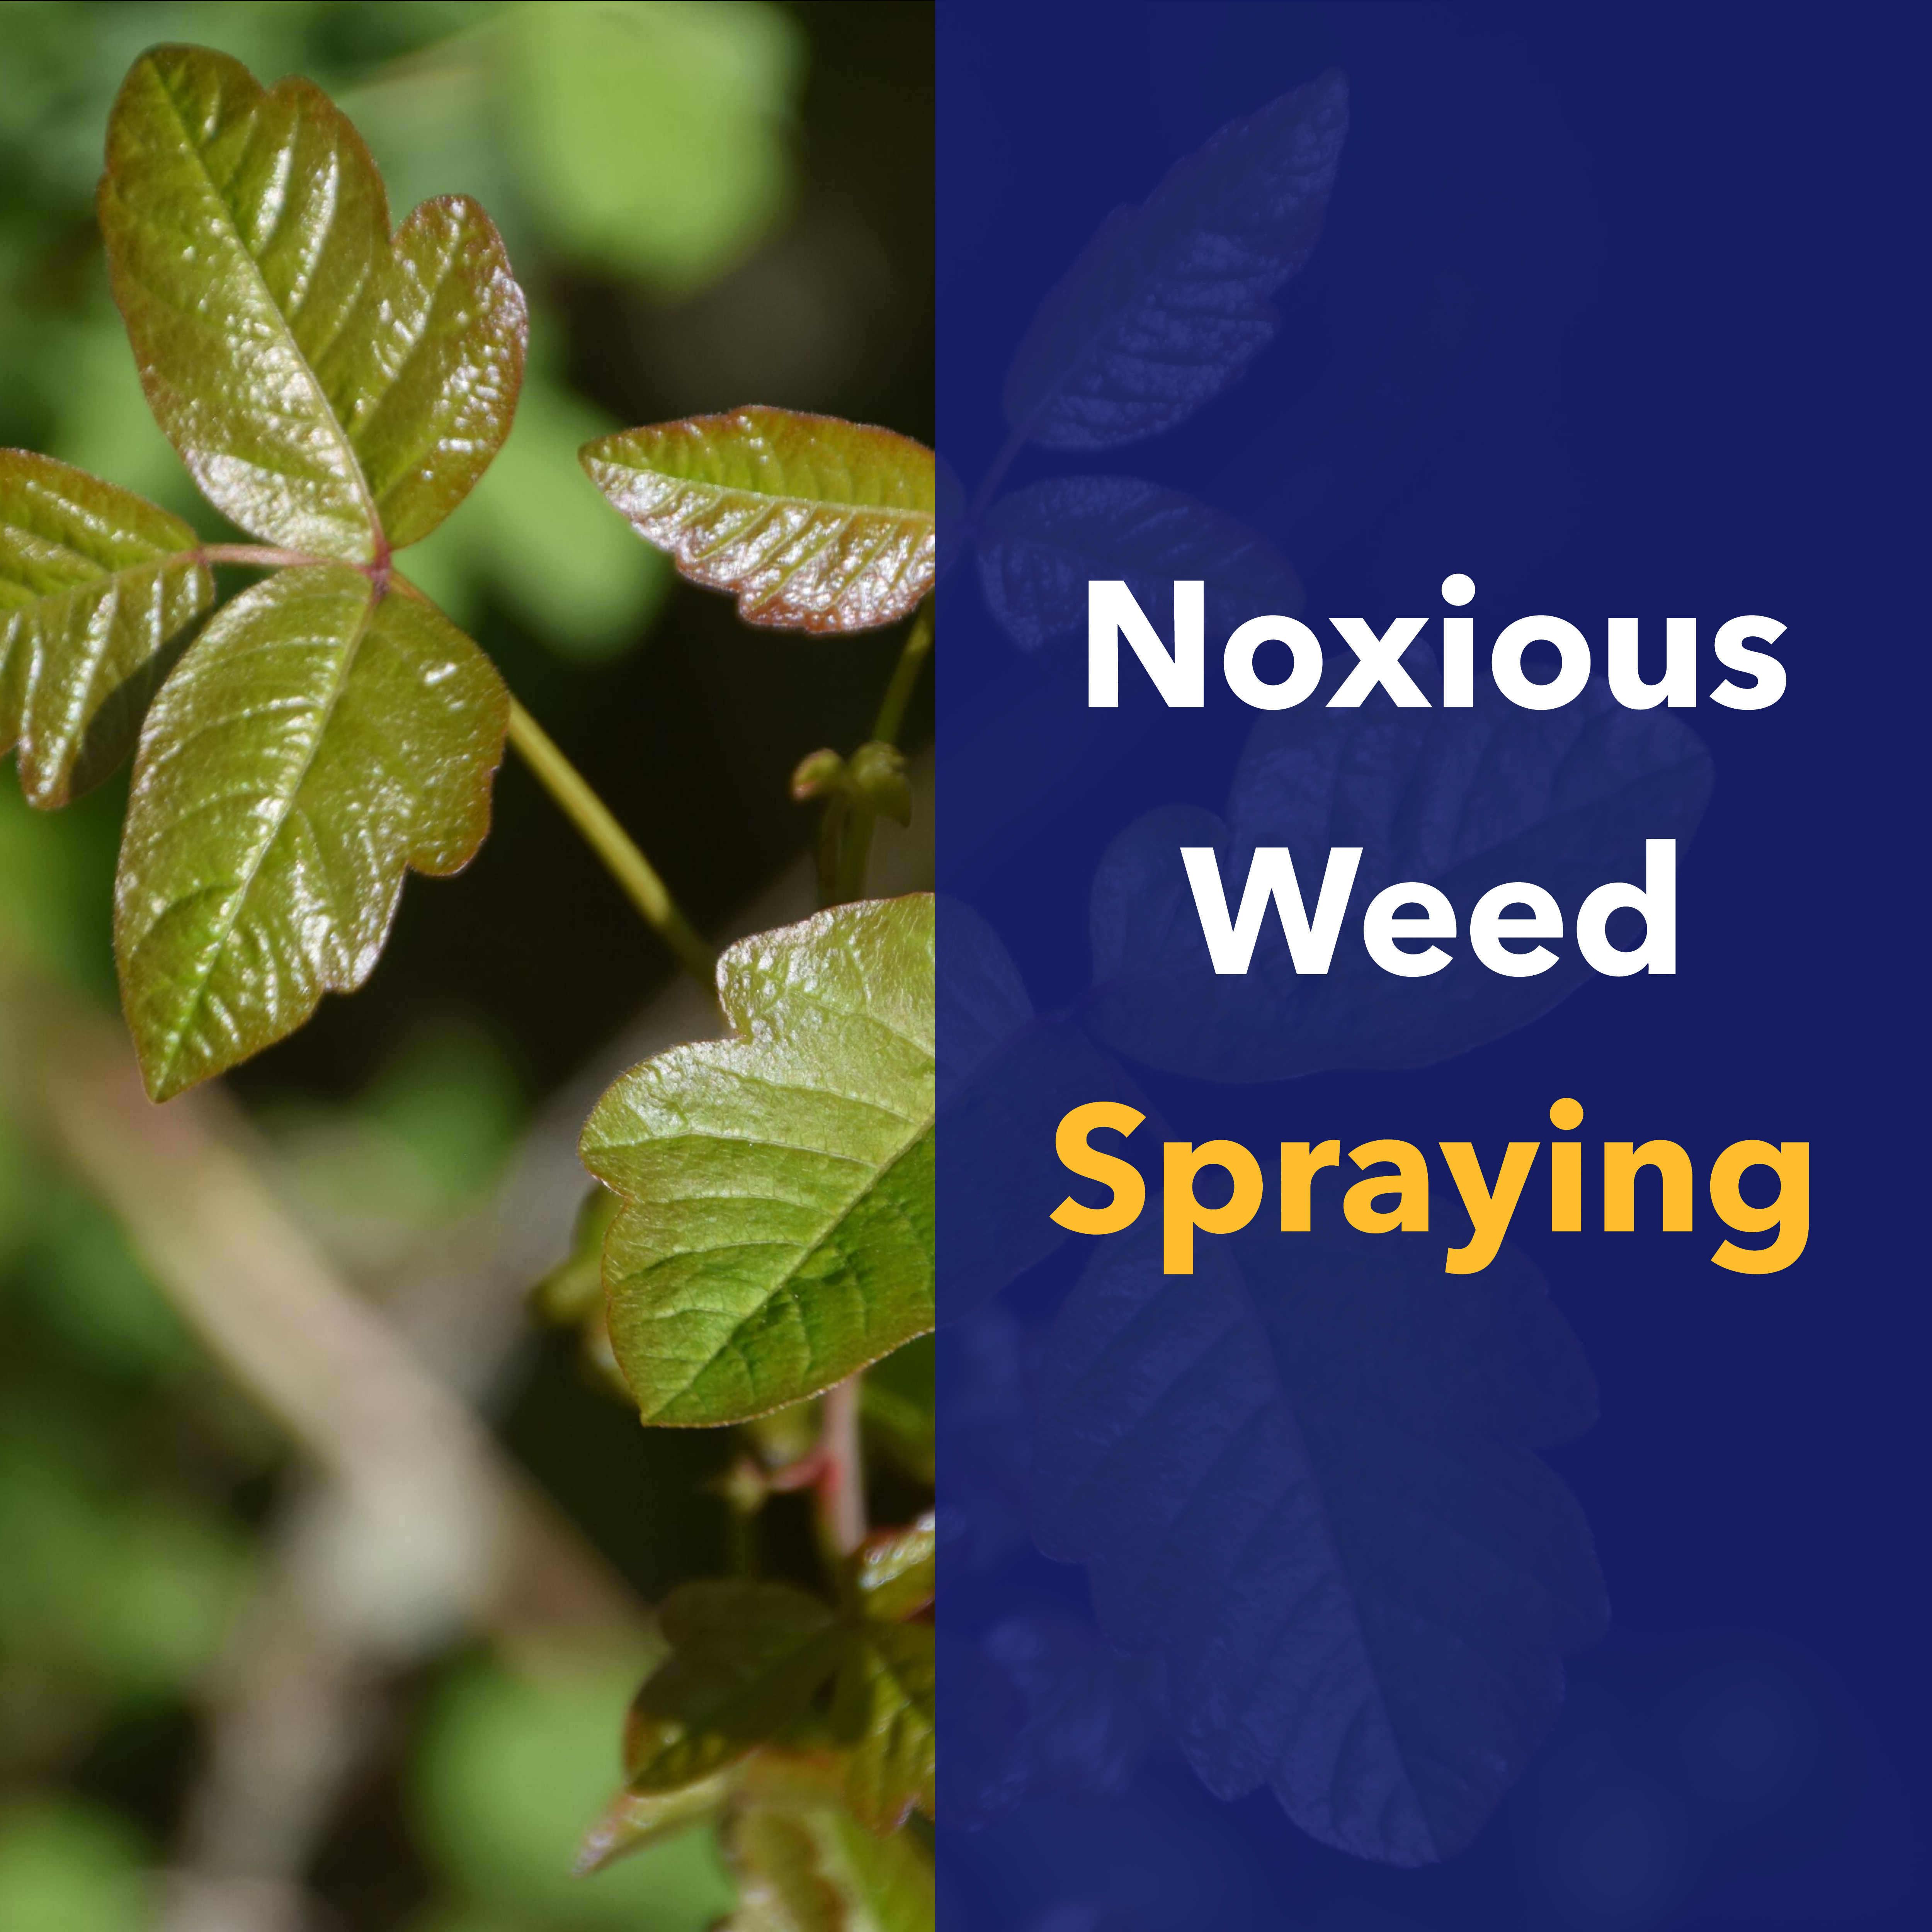 Picture of poison Ivy with a blue overlay that says 'noxious weed spraying.'